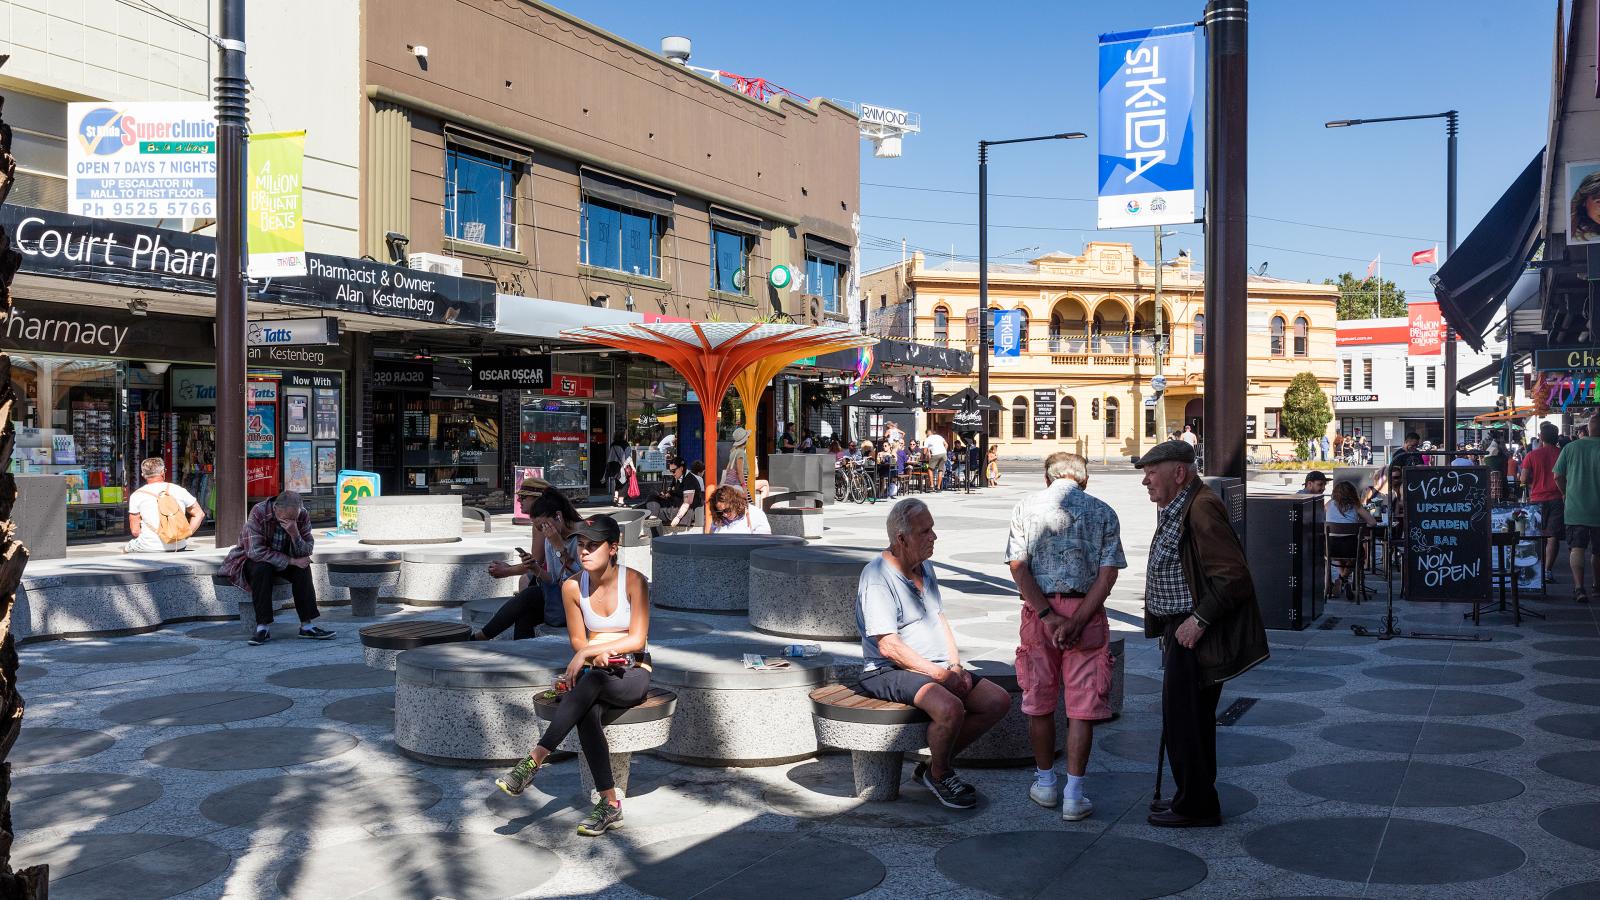 A busy outdoor commercial plaza on Acland Street, St Kilda, features people sitting on circular concrete benches and walking around. Various shops, including a pharmacy and convenience store, line both sides of the street. An orange modern art structure stands prominently in the middle of the plaza.